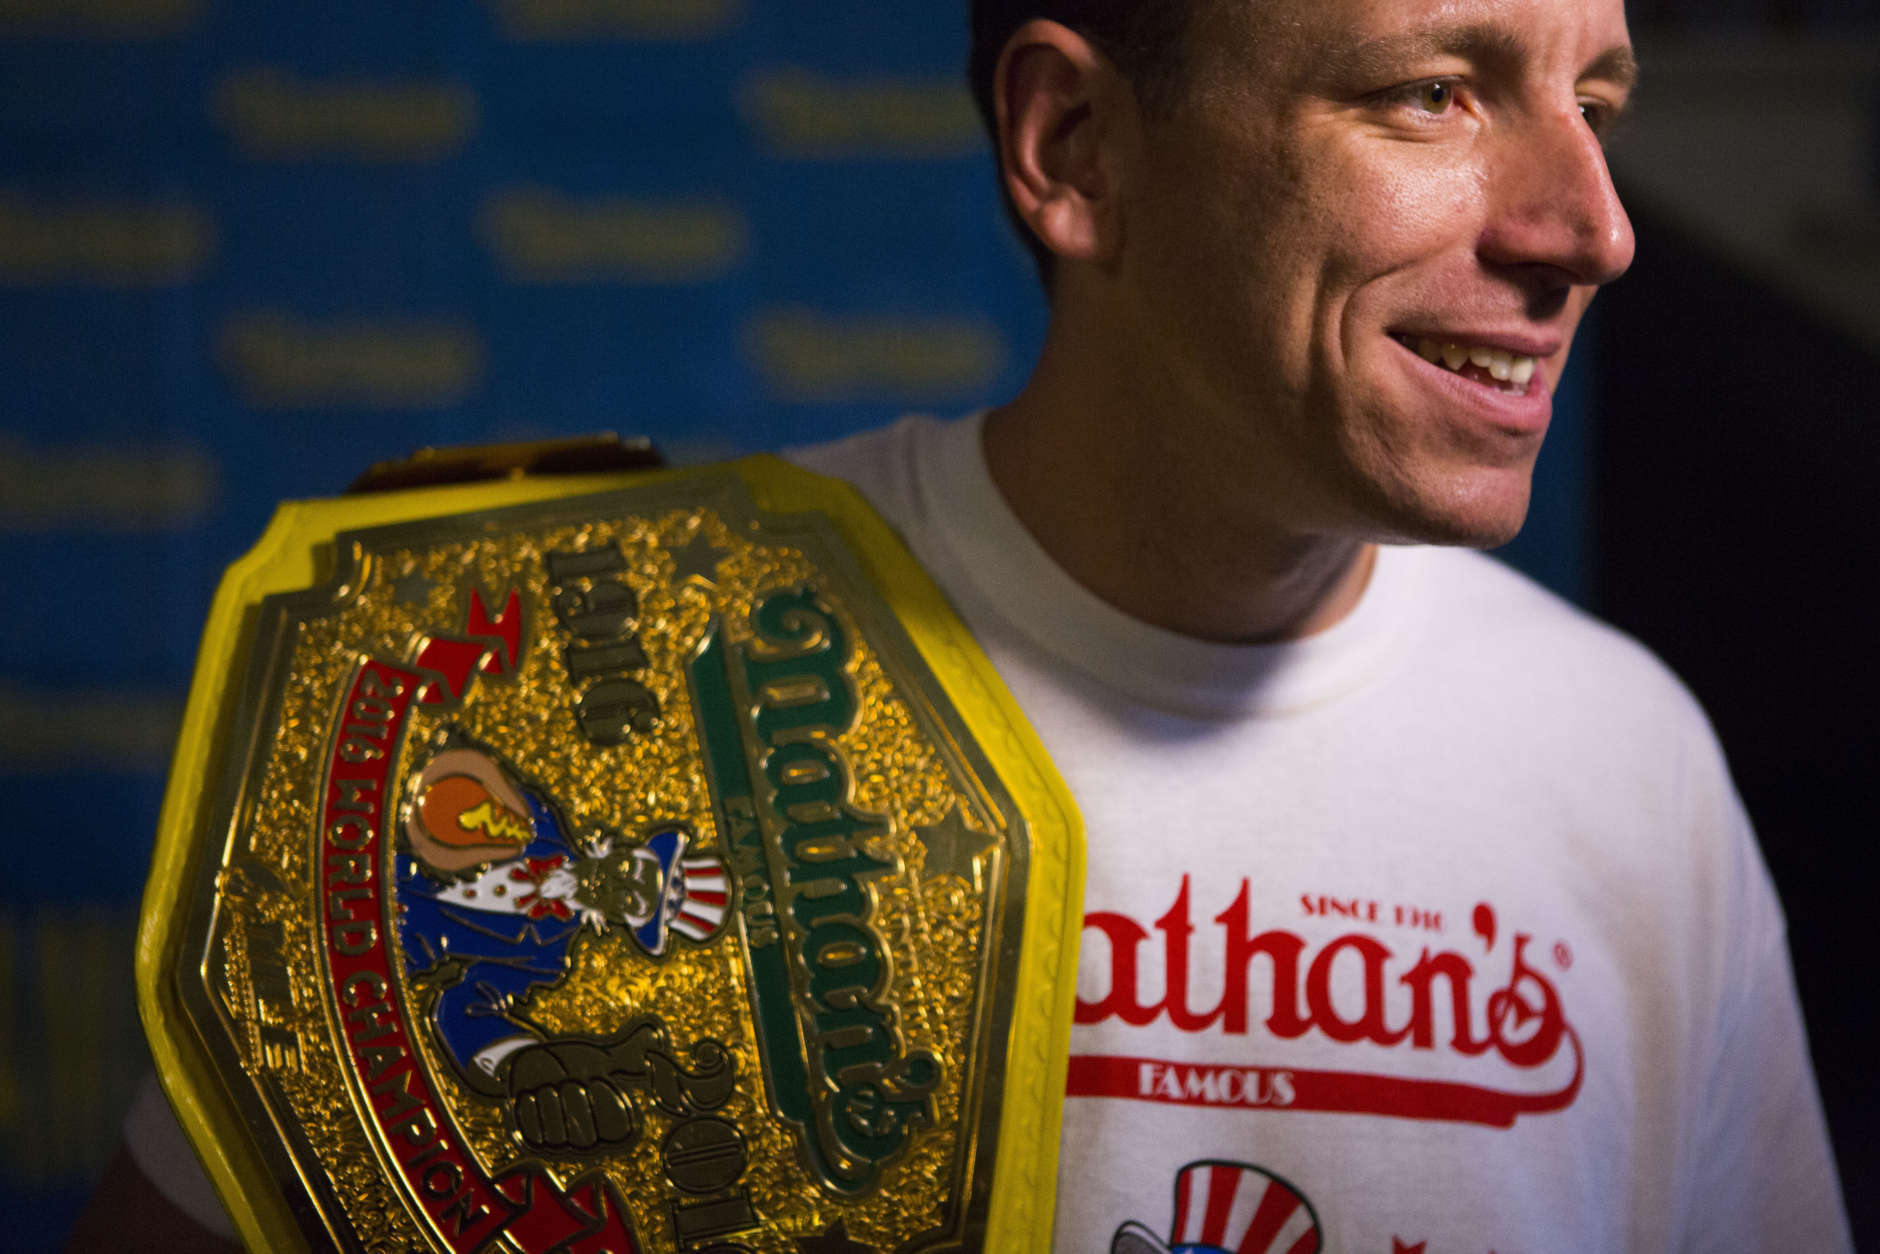 The current world hot dog eating champion, Joey Chestnut speaks to the media after the Nathan's Famous Hotdog eating contest weight in on Monday, July 3, 2017, in Brooklyn, New York. Chestnut weight in at 220.5 and will be defending his title from Matt Stonie who has defeat Chestnut in the past. (AP Photo/Michael Noble)